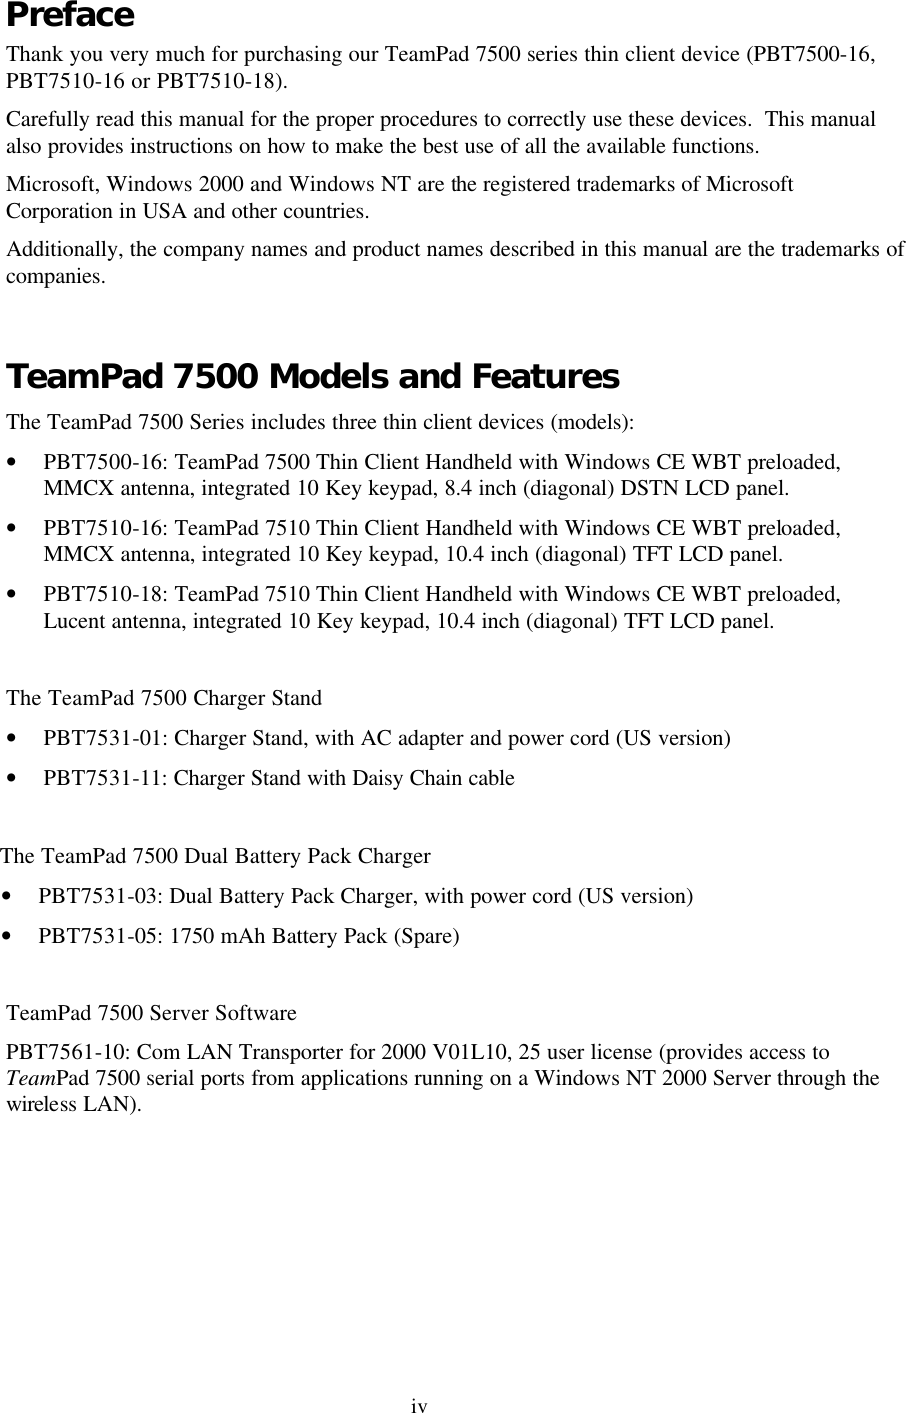 iv Preface Thank you very much for purchasing our TeamPad 7500 series thin client device (PBT7500-16, PBT7510-16 or PBT7510-18). Carefully read this manual for the proper procedures to correctly use these devices.  This manual also provides instructions on how to make the best use of all the available functions. Microsoft, Windows 2000 and Windows NT are the registered trademarks of Microsoft Corporation in USA and other countries. Additionally, the company names and product names described in this manual are the trademarks of companies.  TeamPad 7500 Models and Features The TeamPad 7500 Series includes three thin client devices (models): • PBT7500-16: TeamPad 7500 Thin Client Handheld with Windows CE WBT preloaded, MMCX antenna, integrated 10 Key keypad, 8.4 inch (diagonal) DSTN LCD panel. • PBT7510-16: TeamPad 7510 Thin Client Handheld with Windows CE WBT preloaded, MMCX antenna, integrated 10 Key keypad, 10.4 inch (diagonal) TFT LCD panel. • PBT7510-18: TeamPad 7510 Thin Client Handheld with Windows CE WBT preloaded, Lucent antenna, integrated 10 Key keypad, 10.4 inch (diagonal) TFT LCD panel.  The TeamPad 7500 Charger Stand • PBT7531-01: Charger Stand, with AC adapter and power cord (US version) • PBT7531-11: Charger Stand with Daisy Chain cable             The TeamPad 7500 Dual Battery Pack Charger • PBT7531-03: Dual Battery Pack Charger, with power cord (US version) • PBT7531-05: 1750 mAh Battery Pack (Spare)  TeamPad 7500 Server Software PBT7561-10: Com LAN Transporter for 2000 V01L10, 25 user license (provides access to TeamPad 7500 serial ports from applications running on a Windows NT 2000 Server through the wireless LAN). 